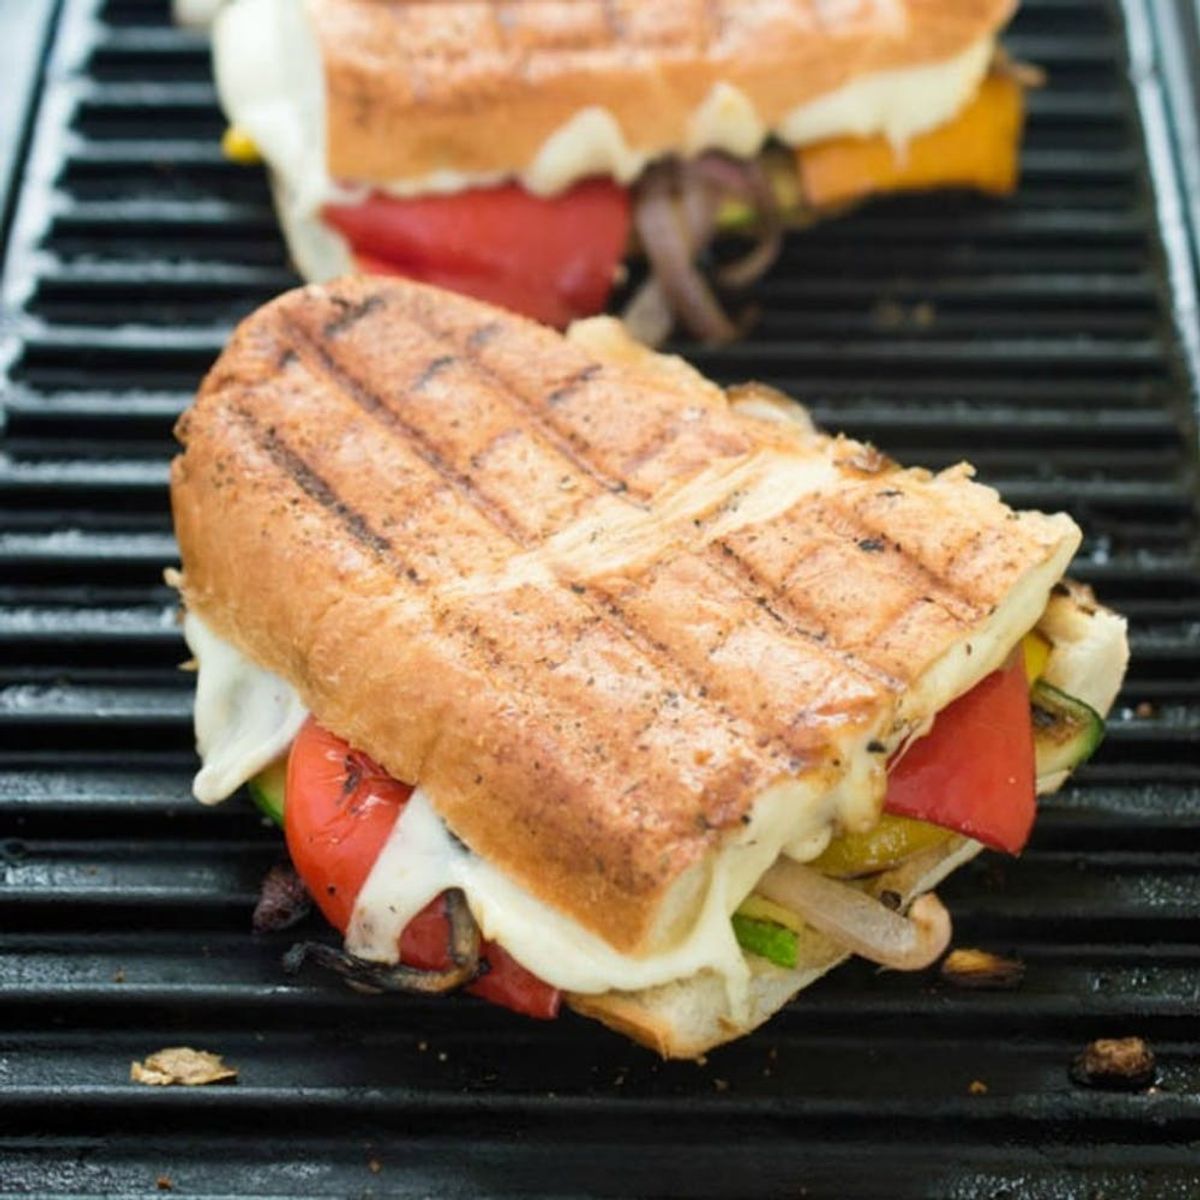 12 Veggie Panini Recipes That Will Send You Straight to Sandwich Heaven on Meatless Monday